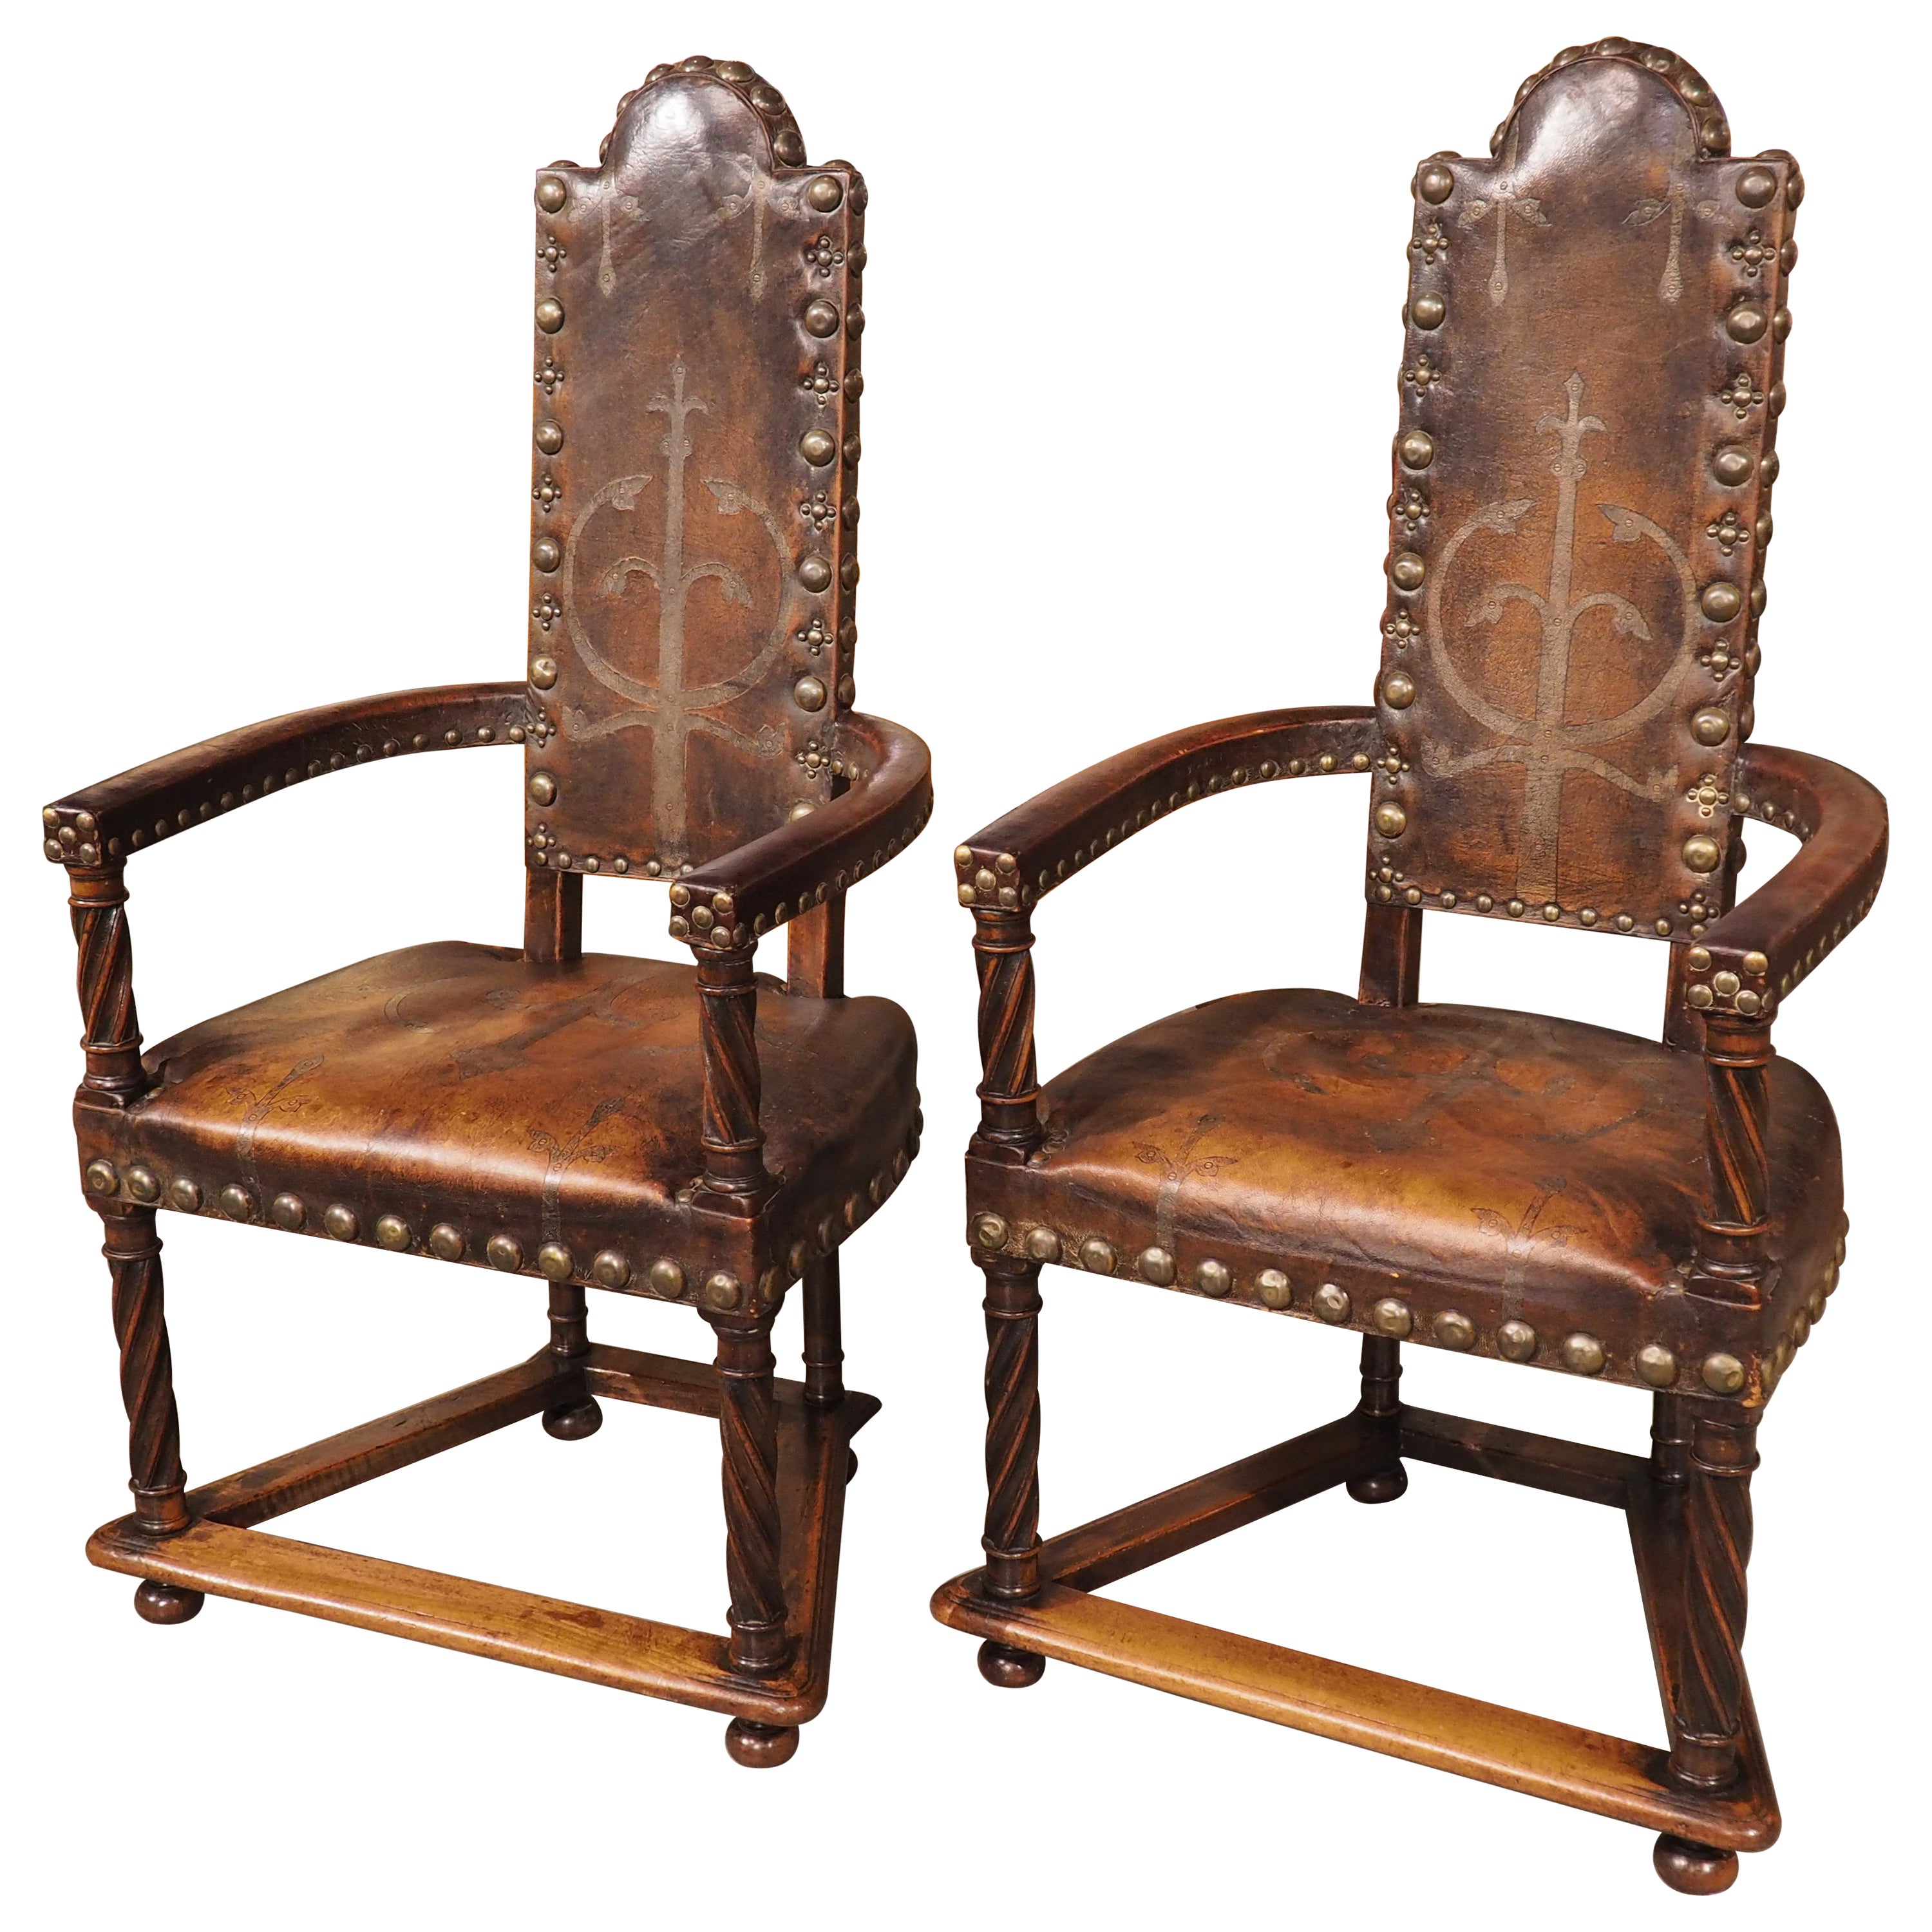 A Unique Pair of 19th Century Studded Leather Armchairs from Spain